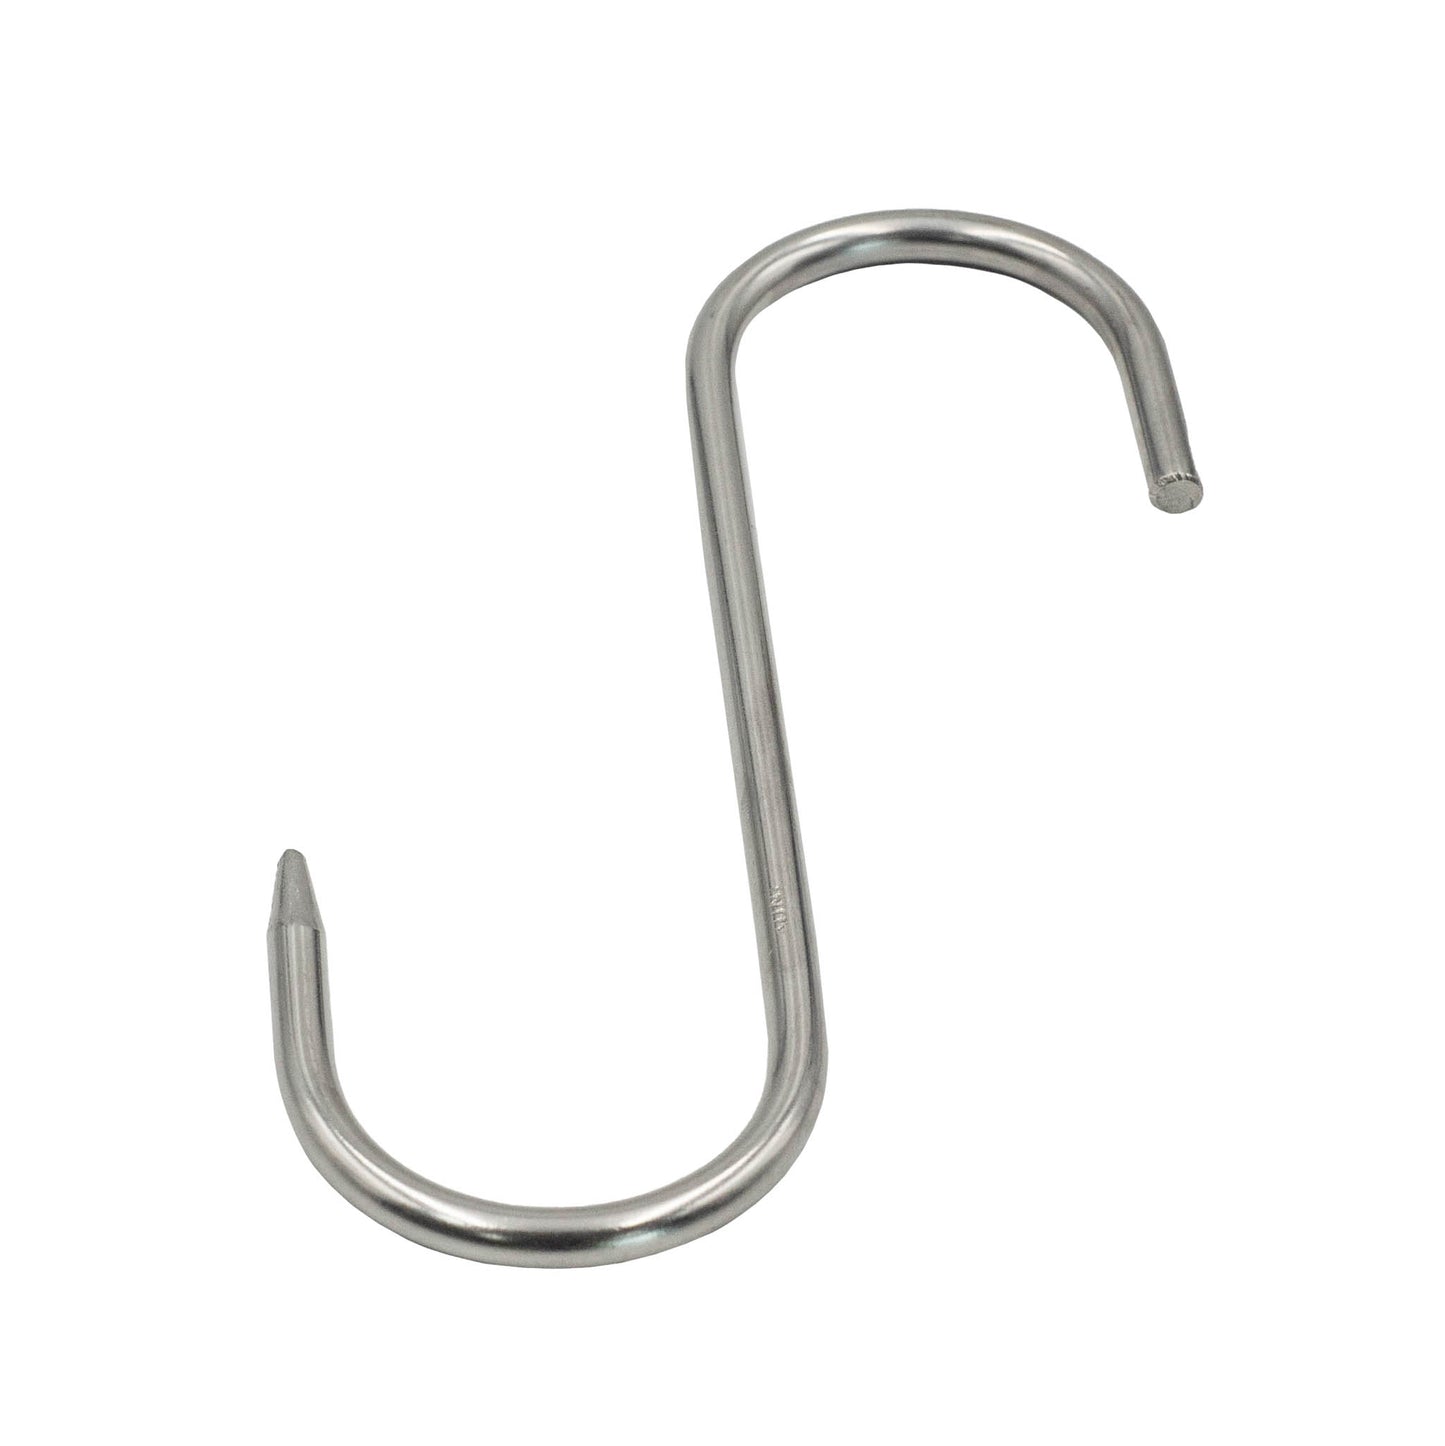 heavy duty stainless steel meat hook for hanging curing meats. 140mm by 5mm